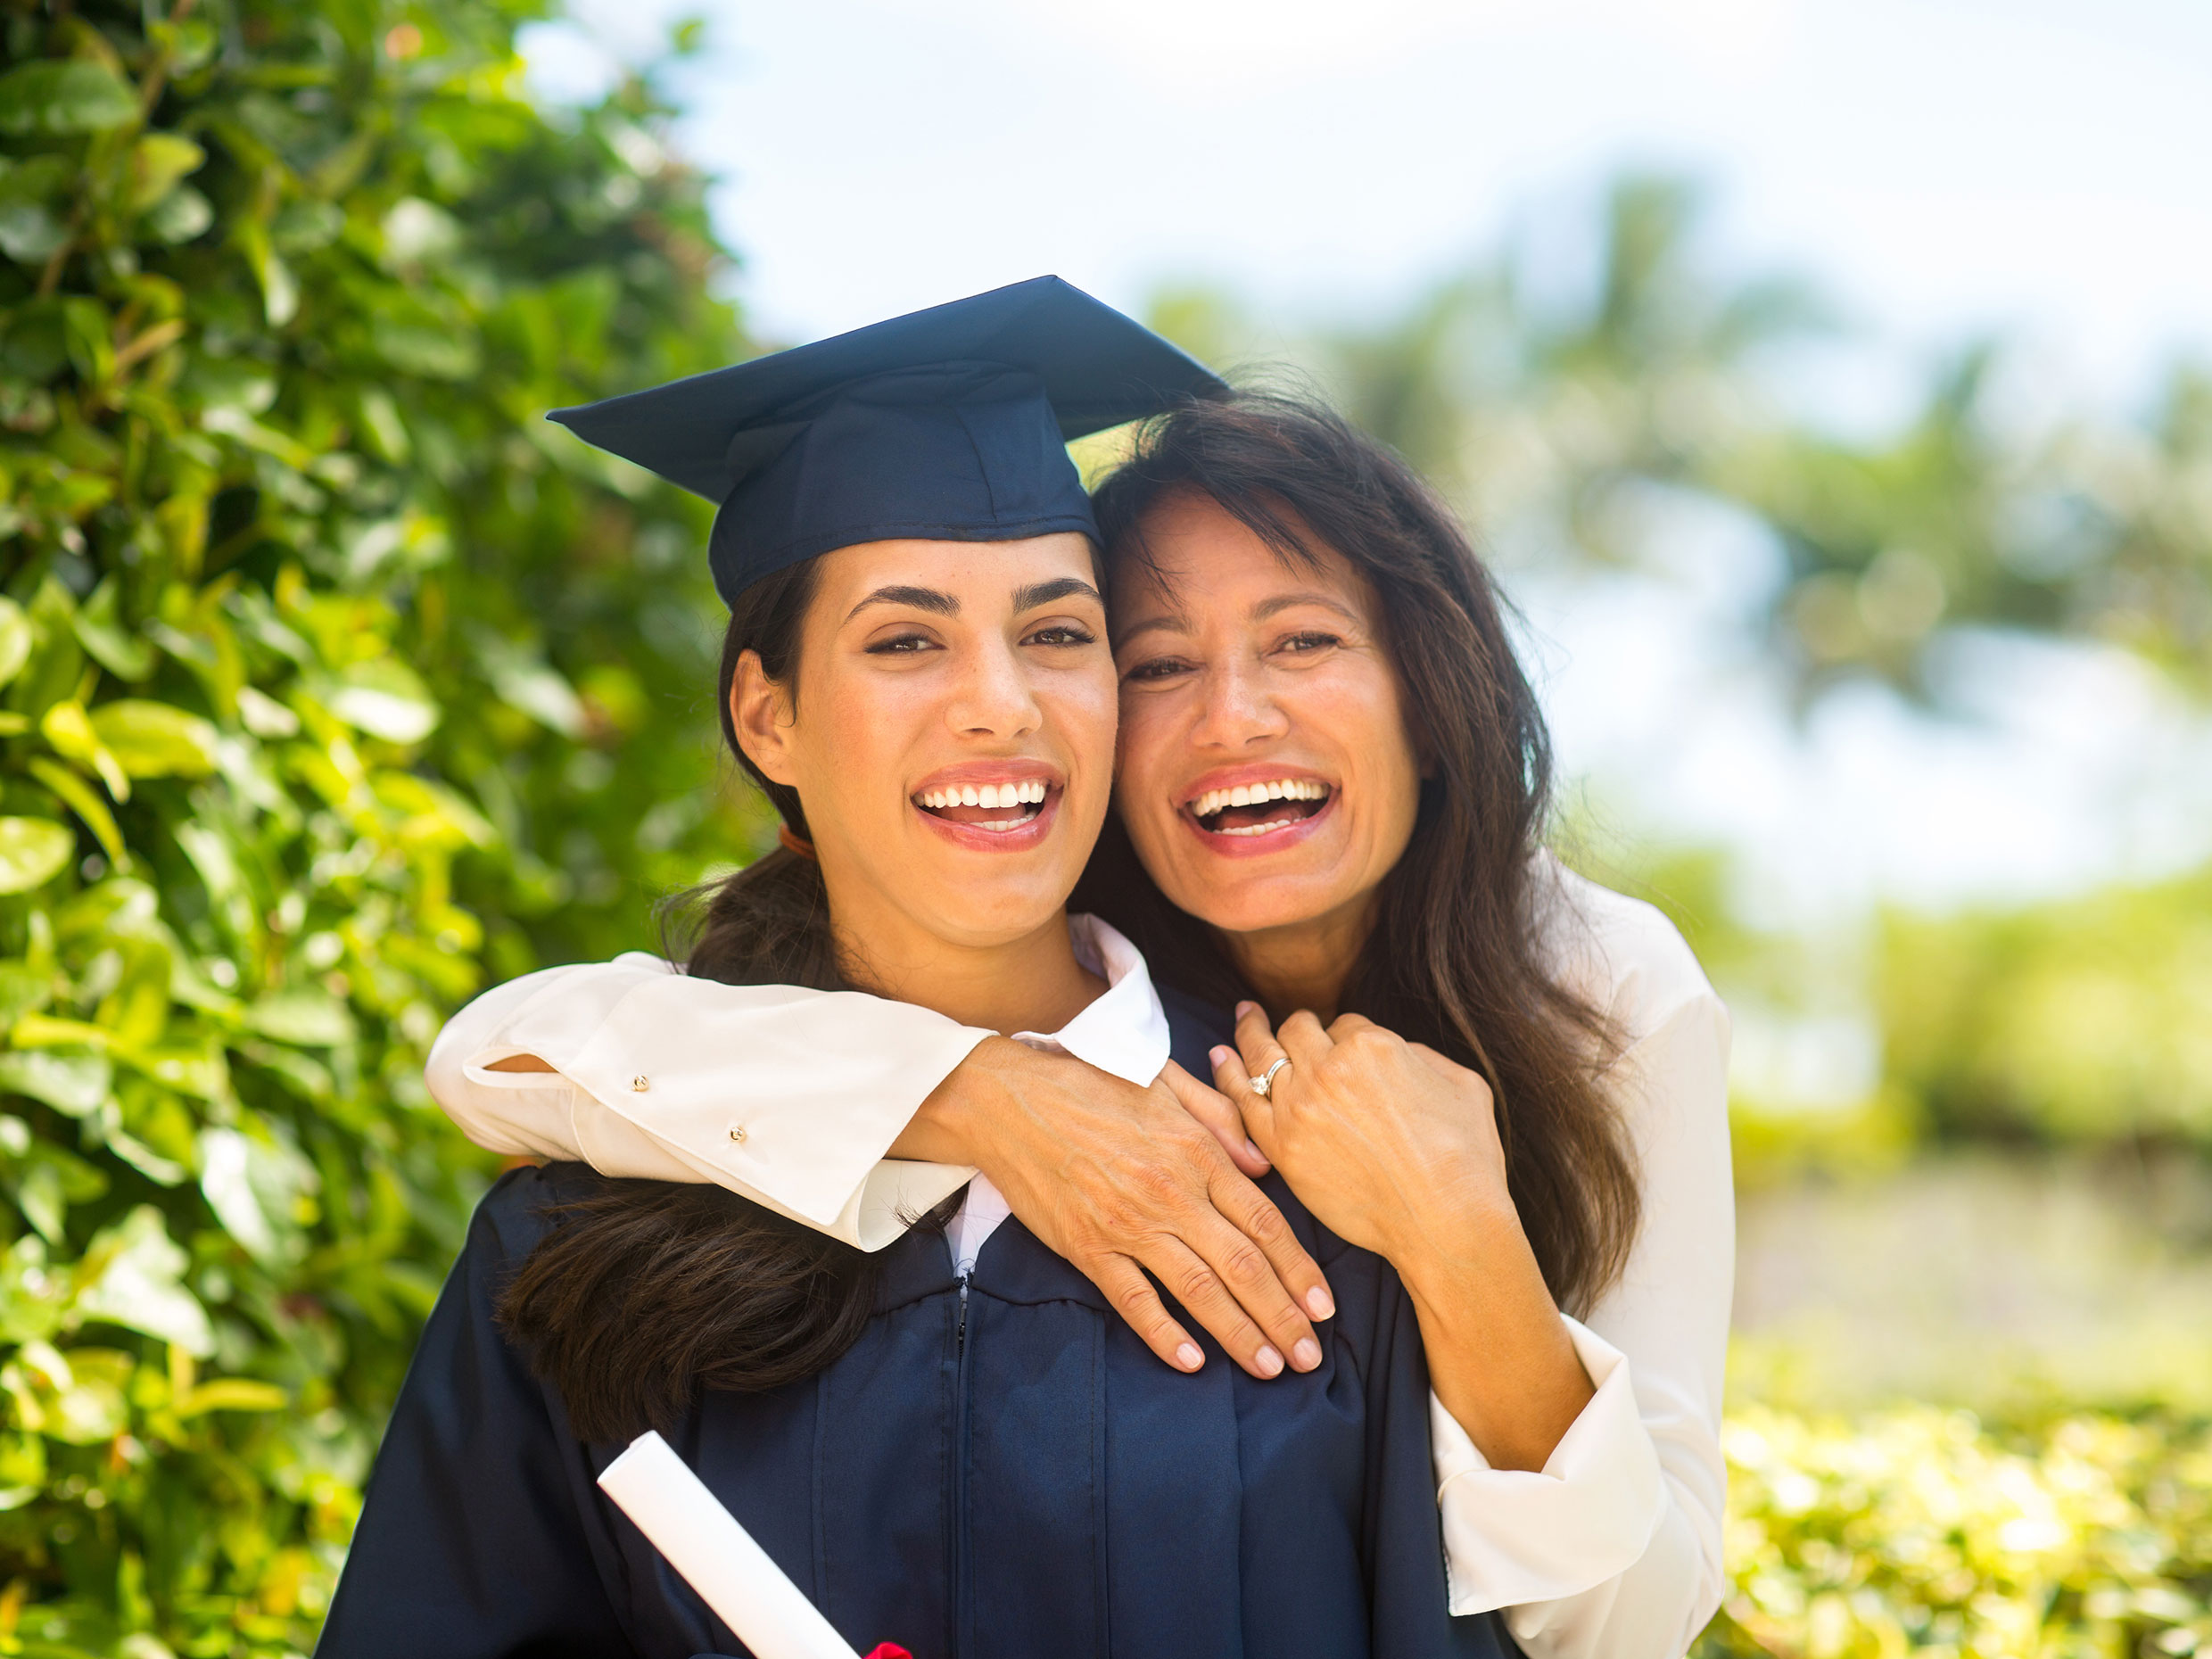 Smiling student in graduation cap and gown standing beside mother.